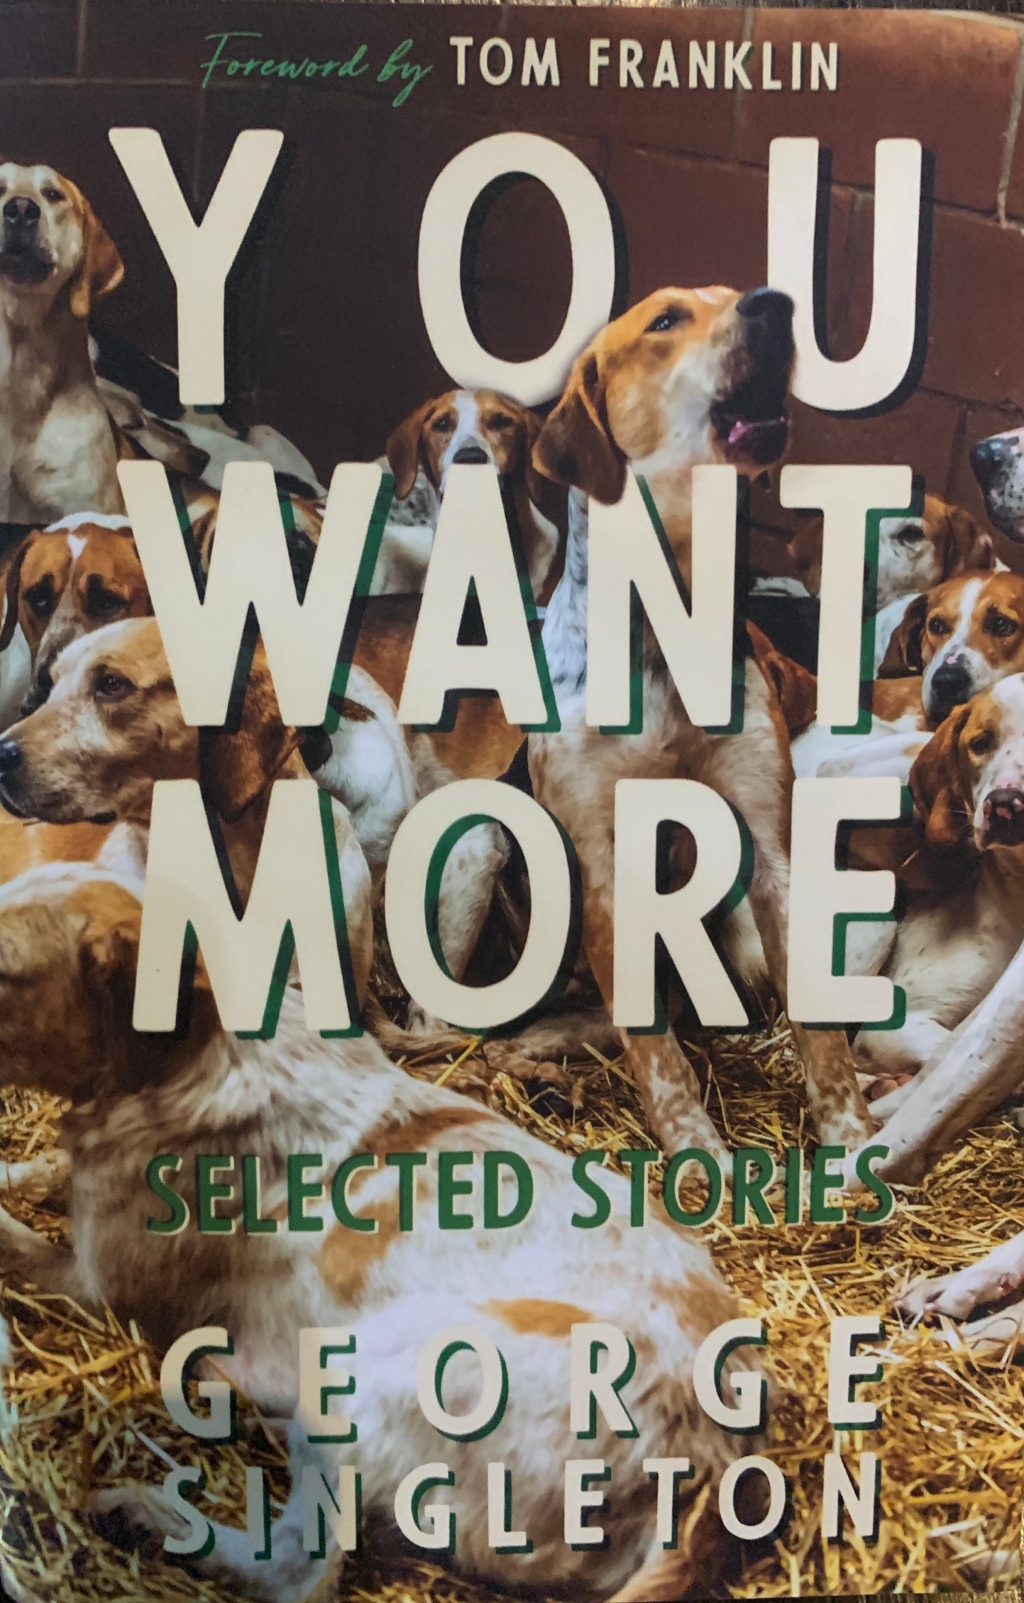 You Want More: The Selected Stories of George Singleton, a Review